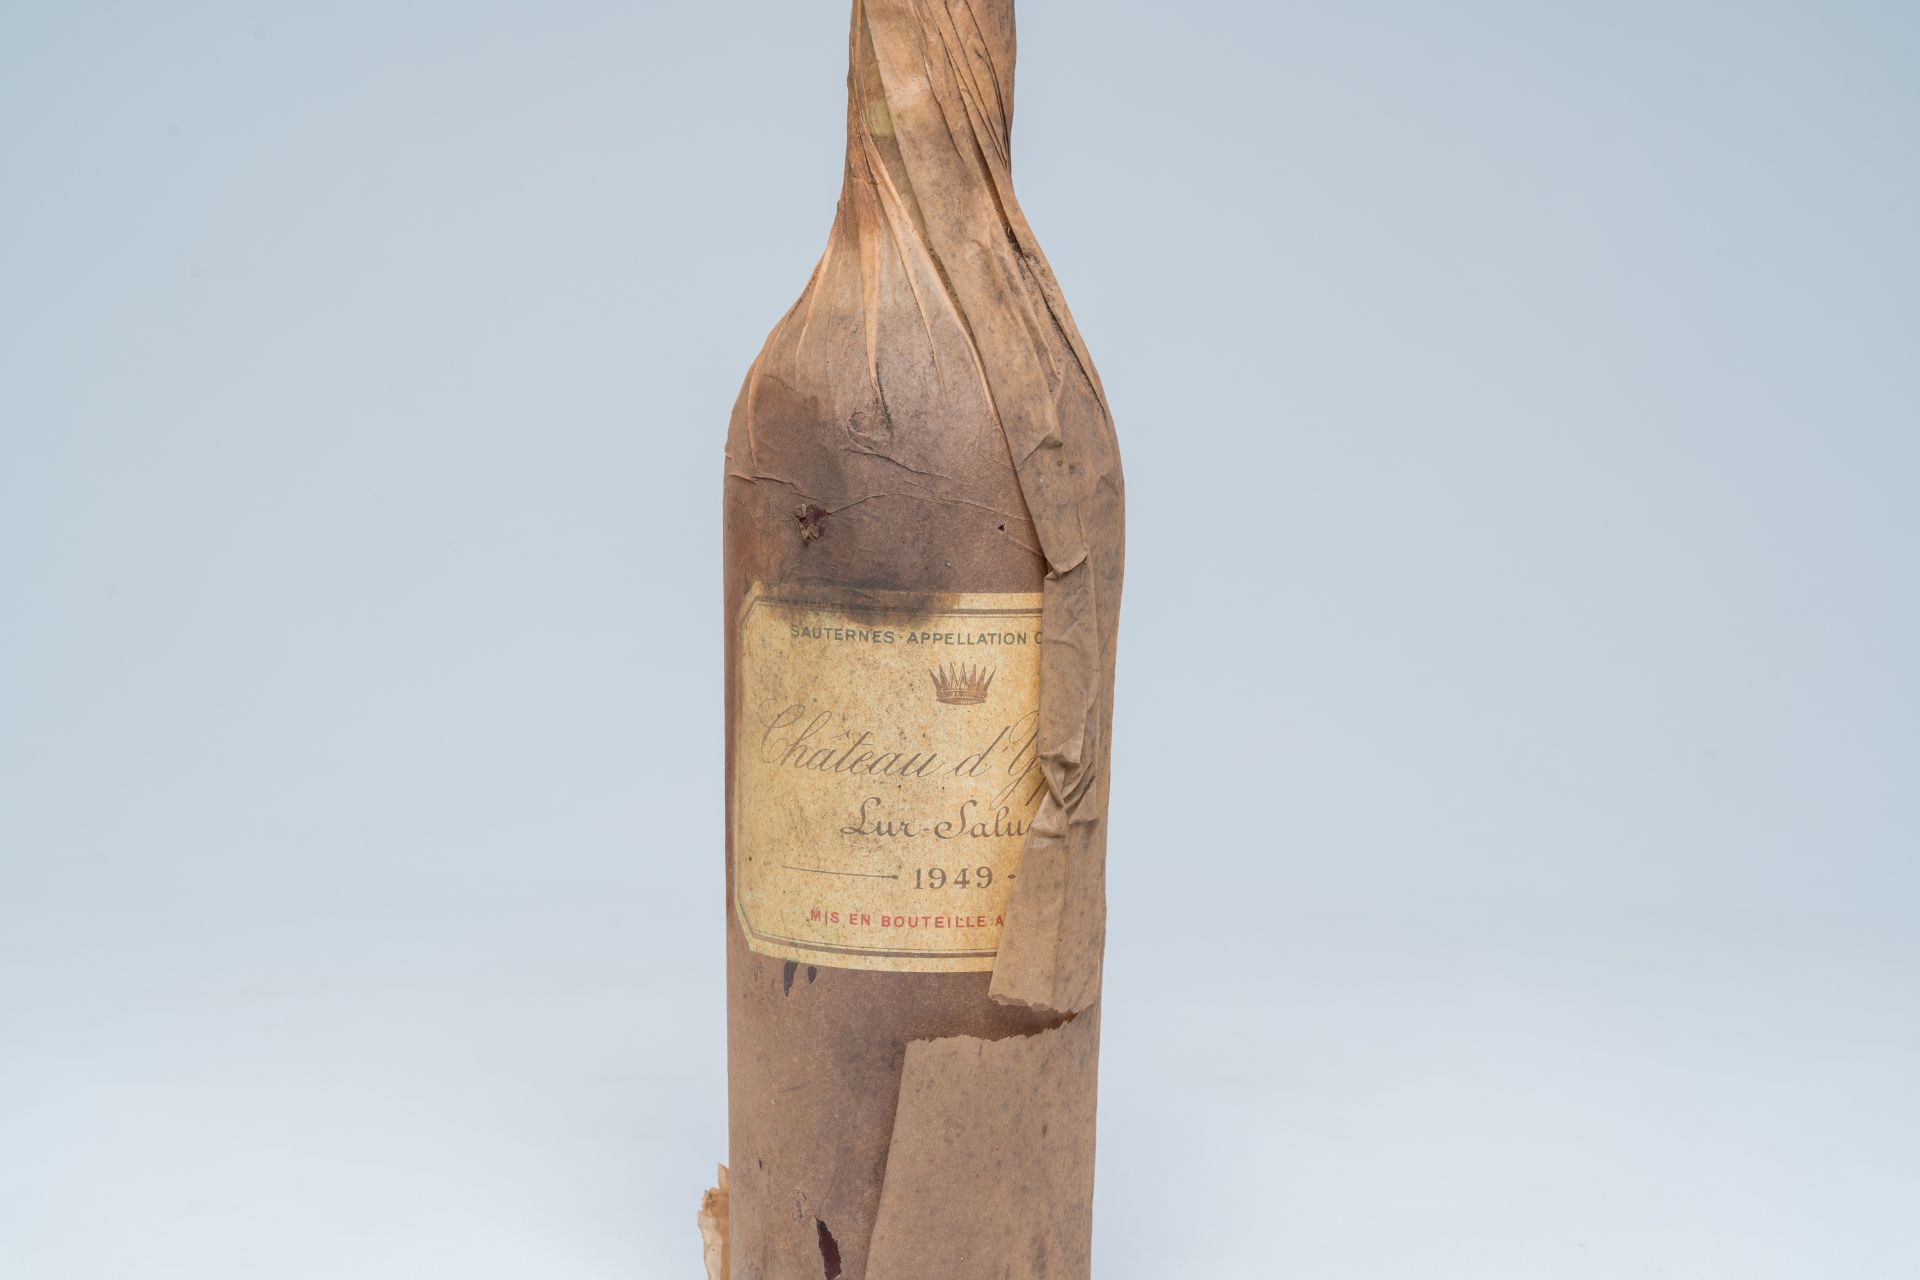 One bottle of 'Chateau d'Yquem', Lur-Saluces, 1949 - Image 5 of 7